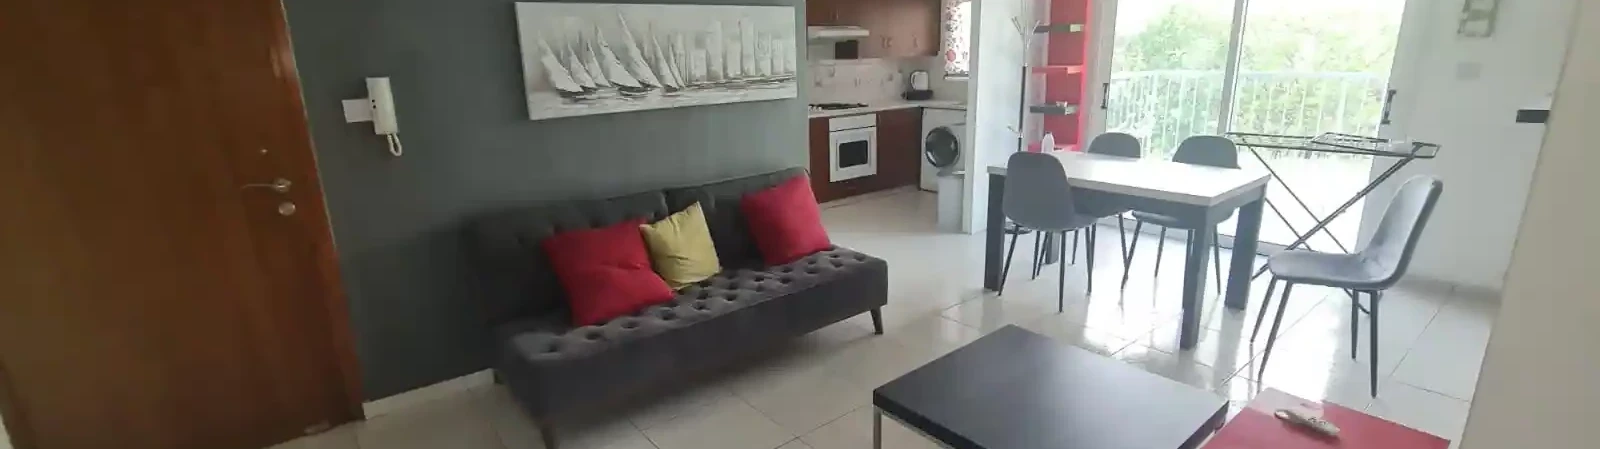 1-bedroom apartment fоr sаle €125.000, image 1